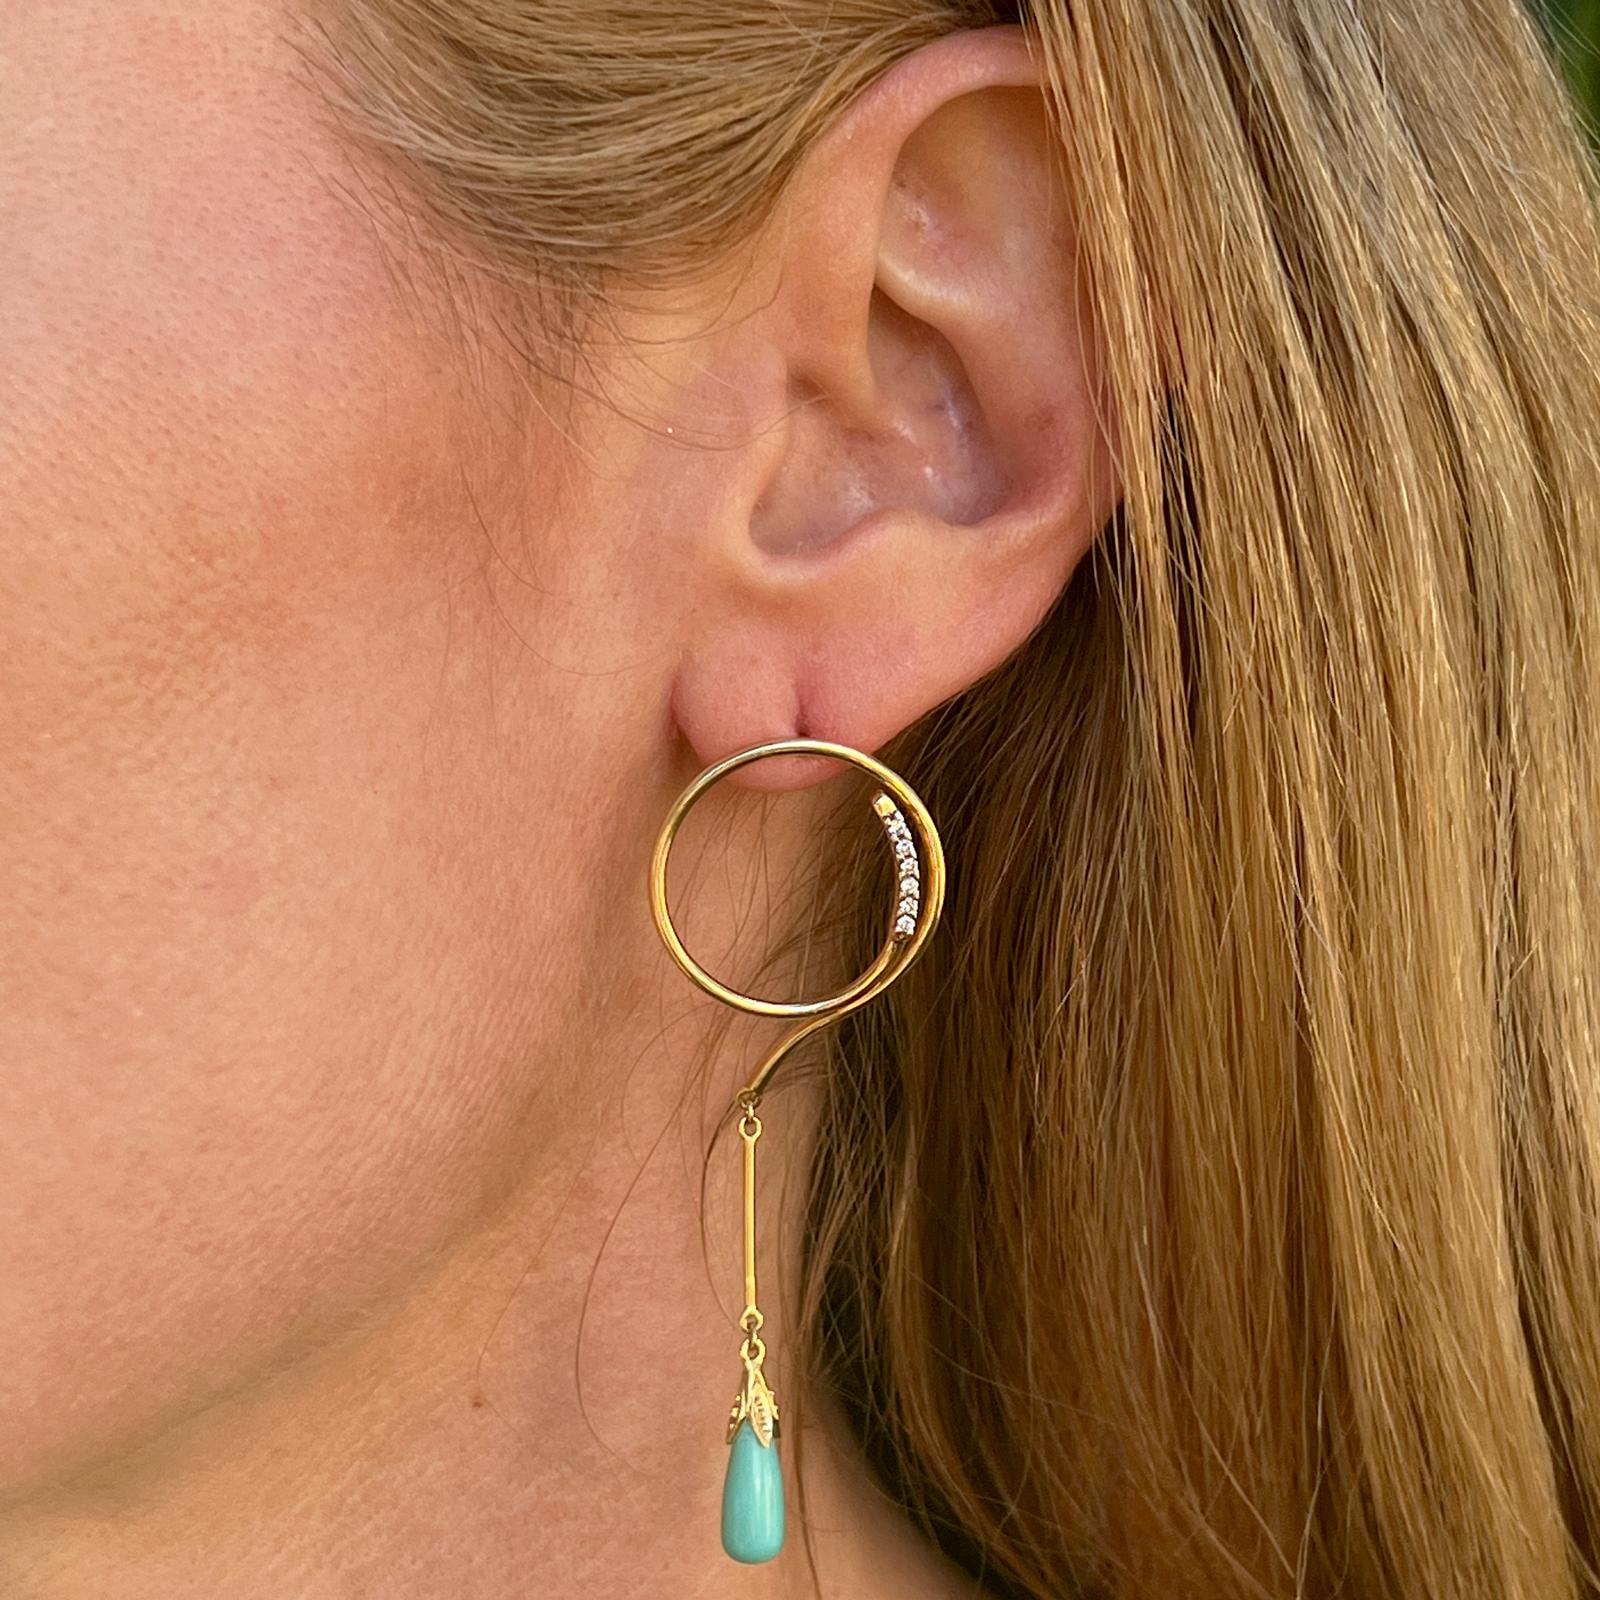 Turquoise and diamond drop earrings crafted in 18 karat yellow gold. The earrings feature open circle tops set with 12 round brilliant cut diamonds weighing approximately .12 CTW and graded H-I color and SI clarity. The gold thin drops are set with